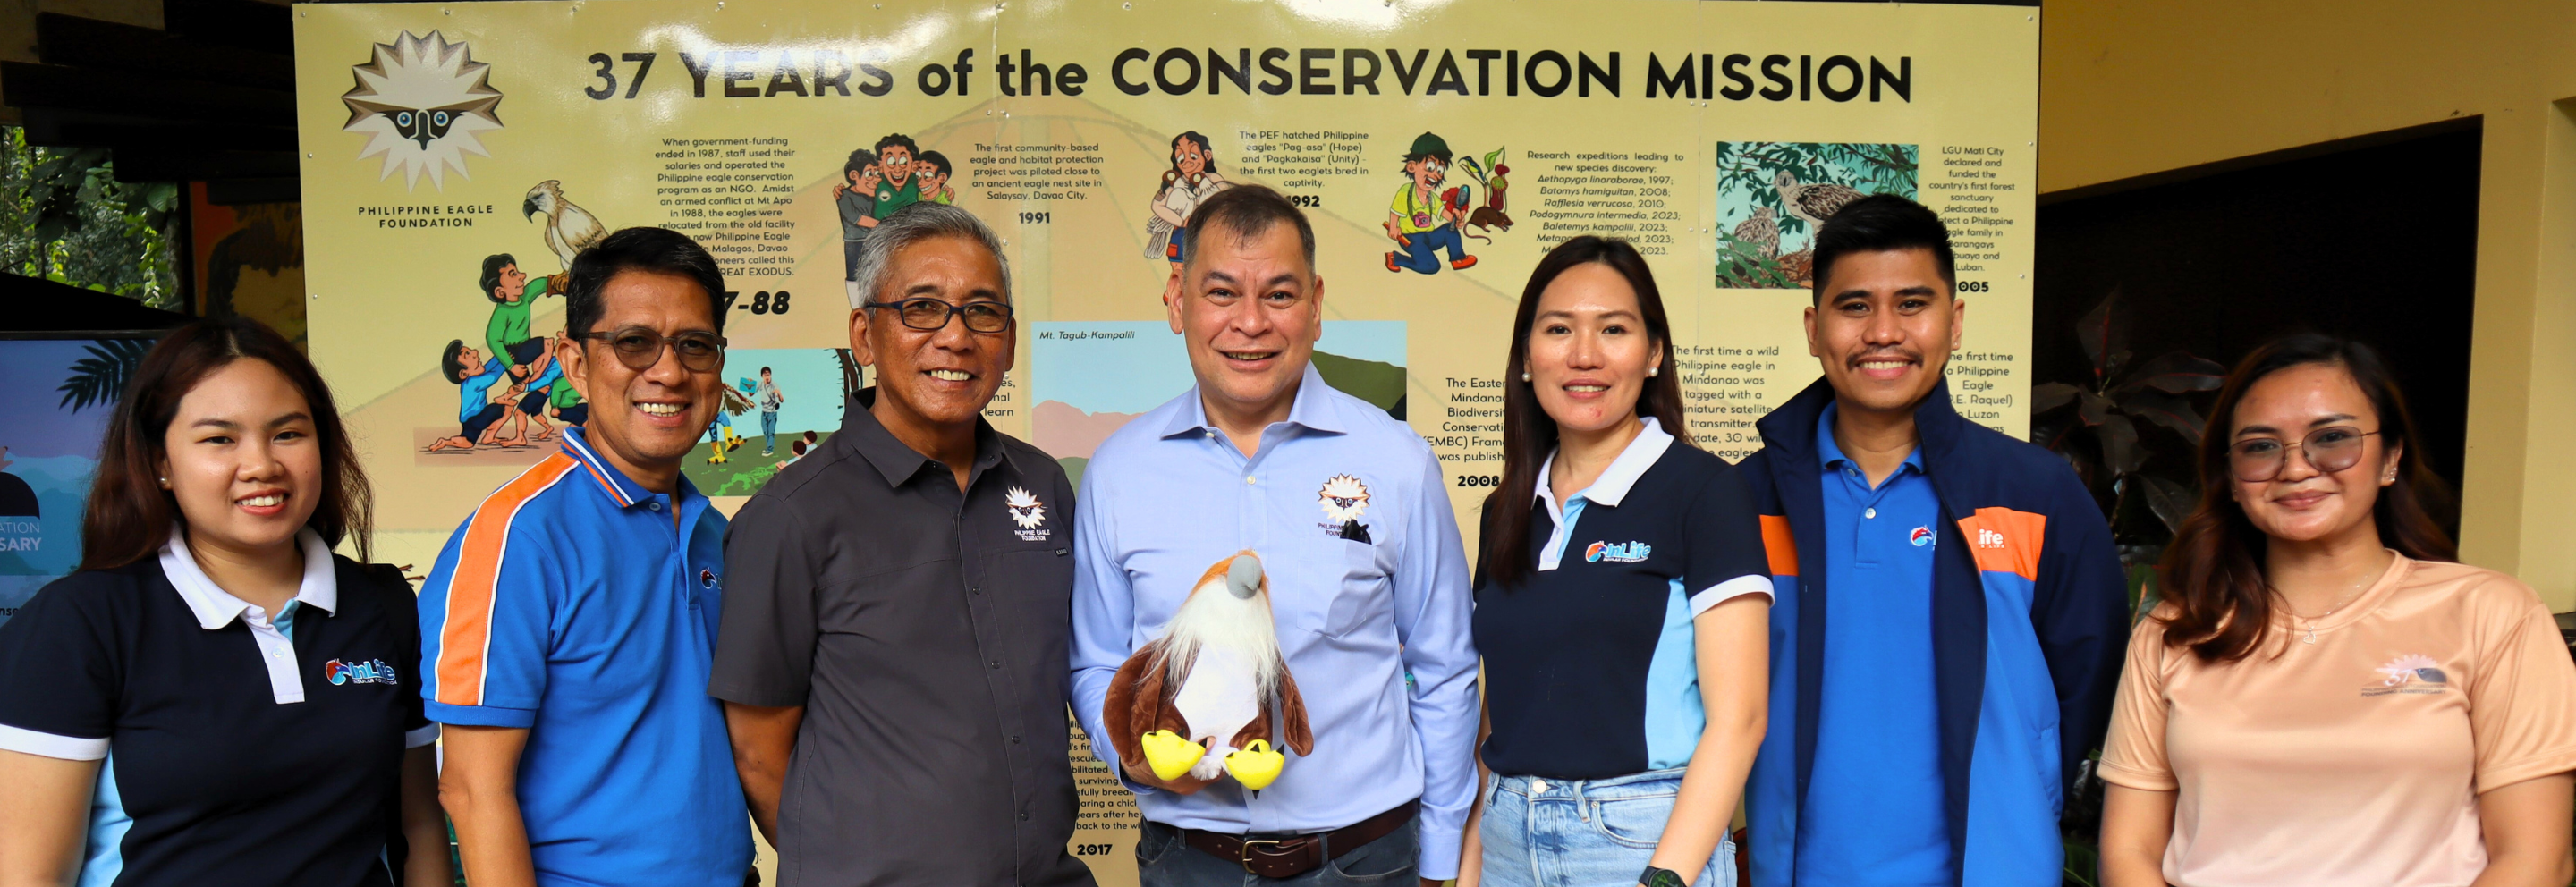 Philippine Eagle Conservation Project